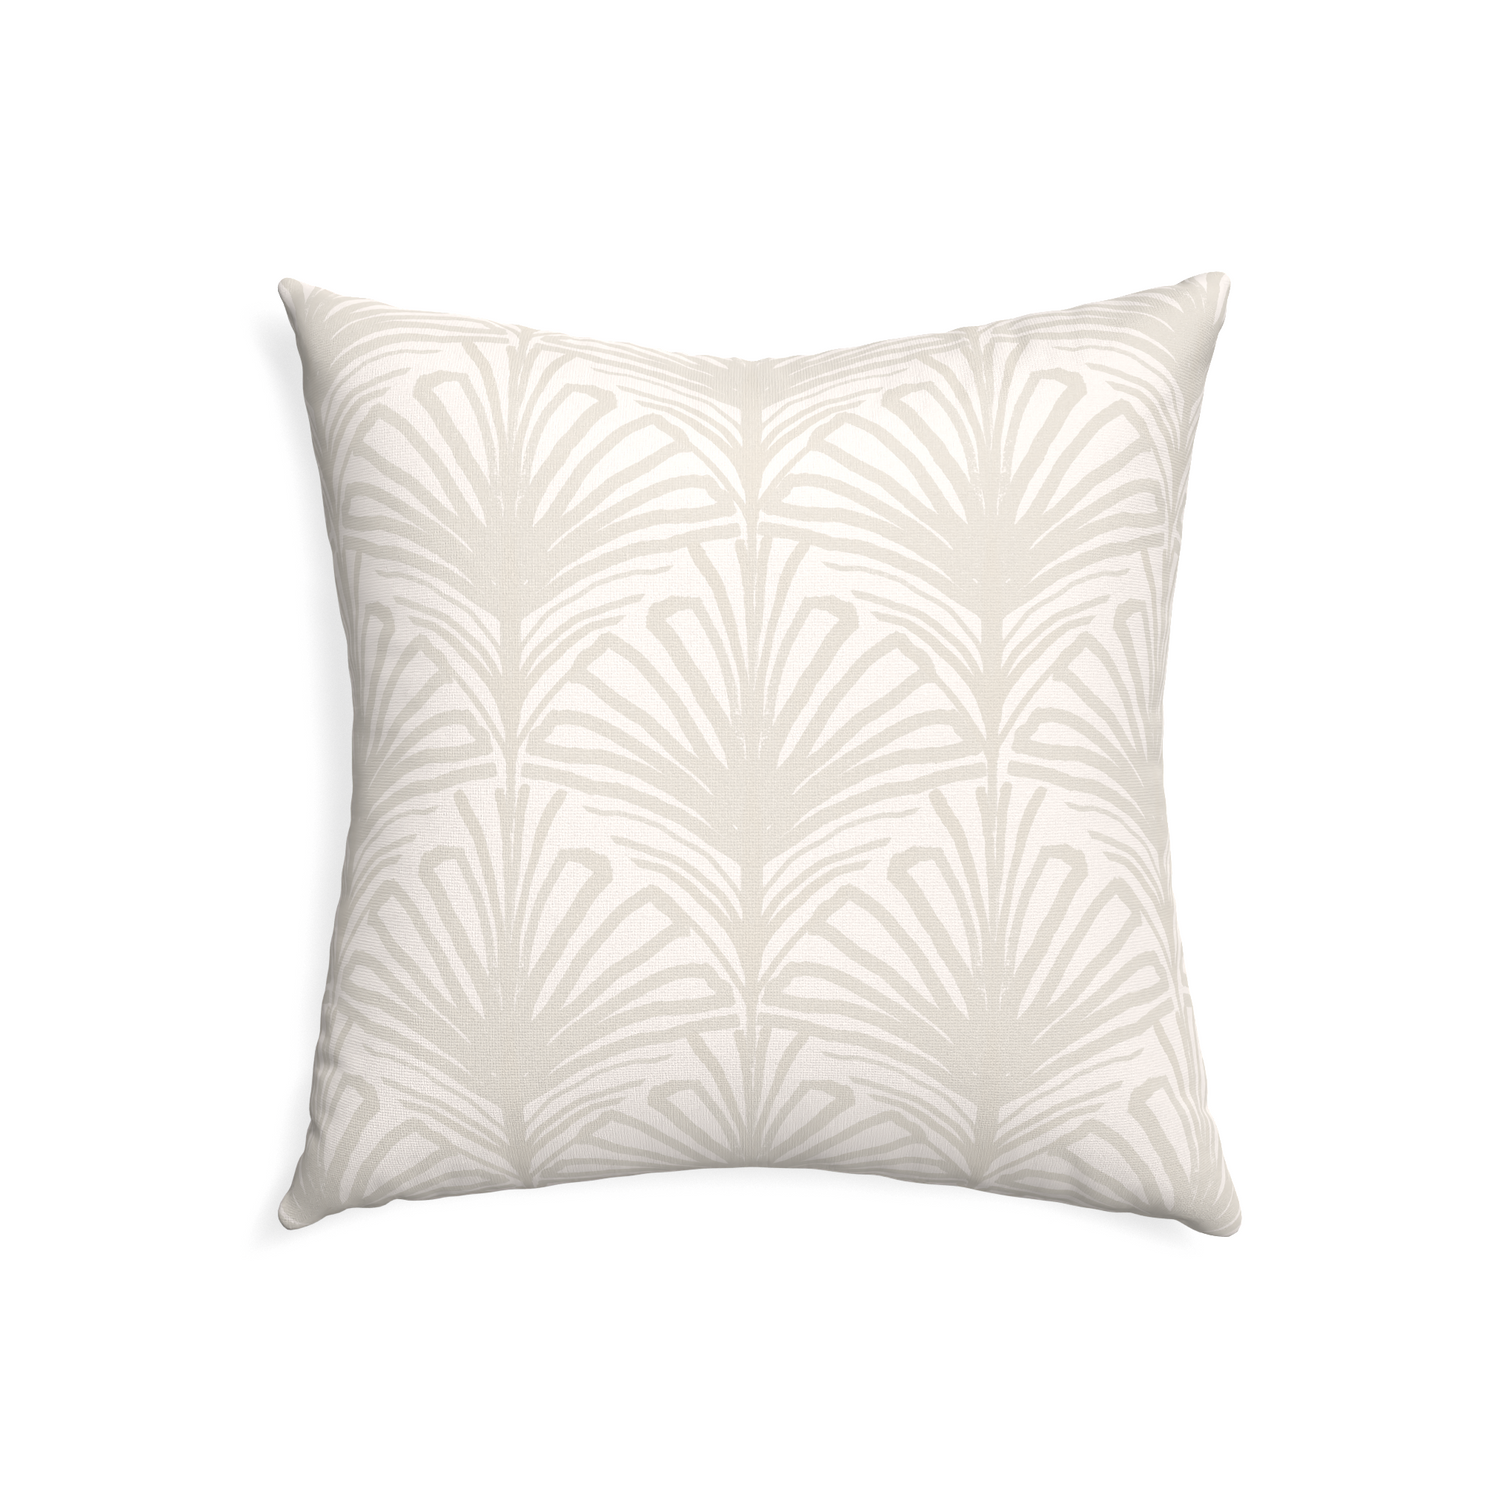 22-square suzy sand custom pillow with none on white background